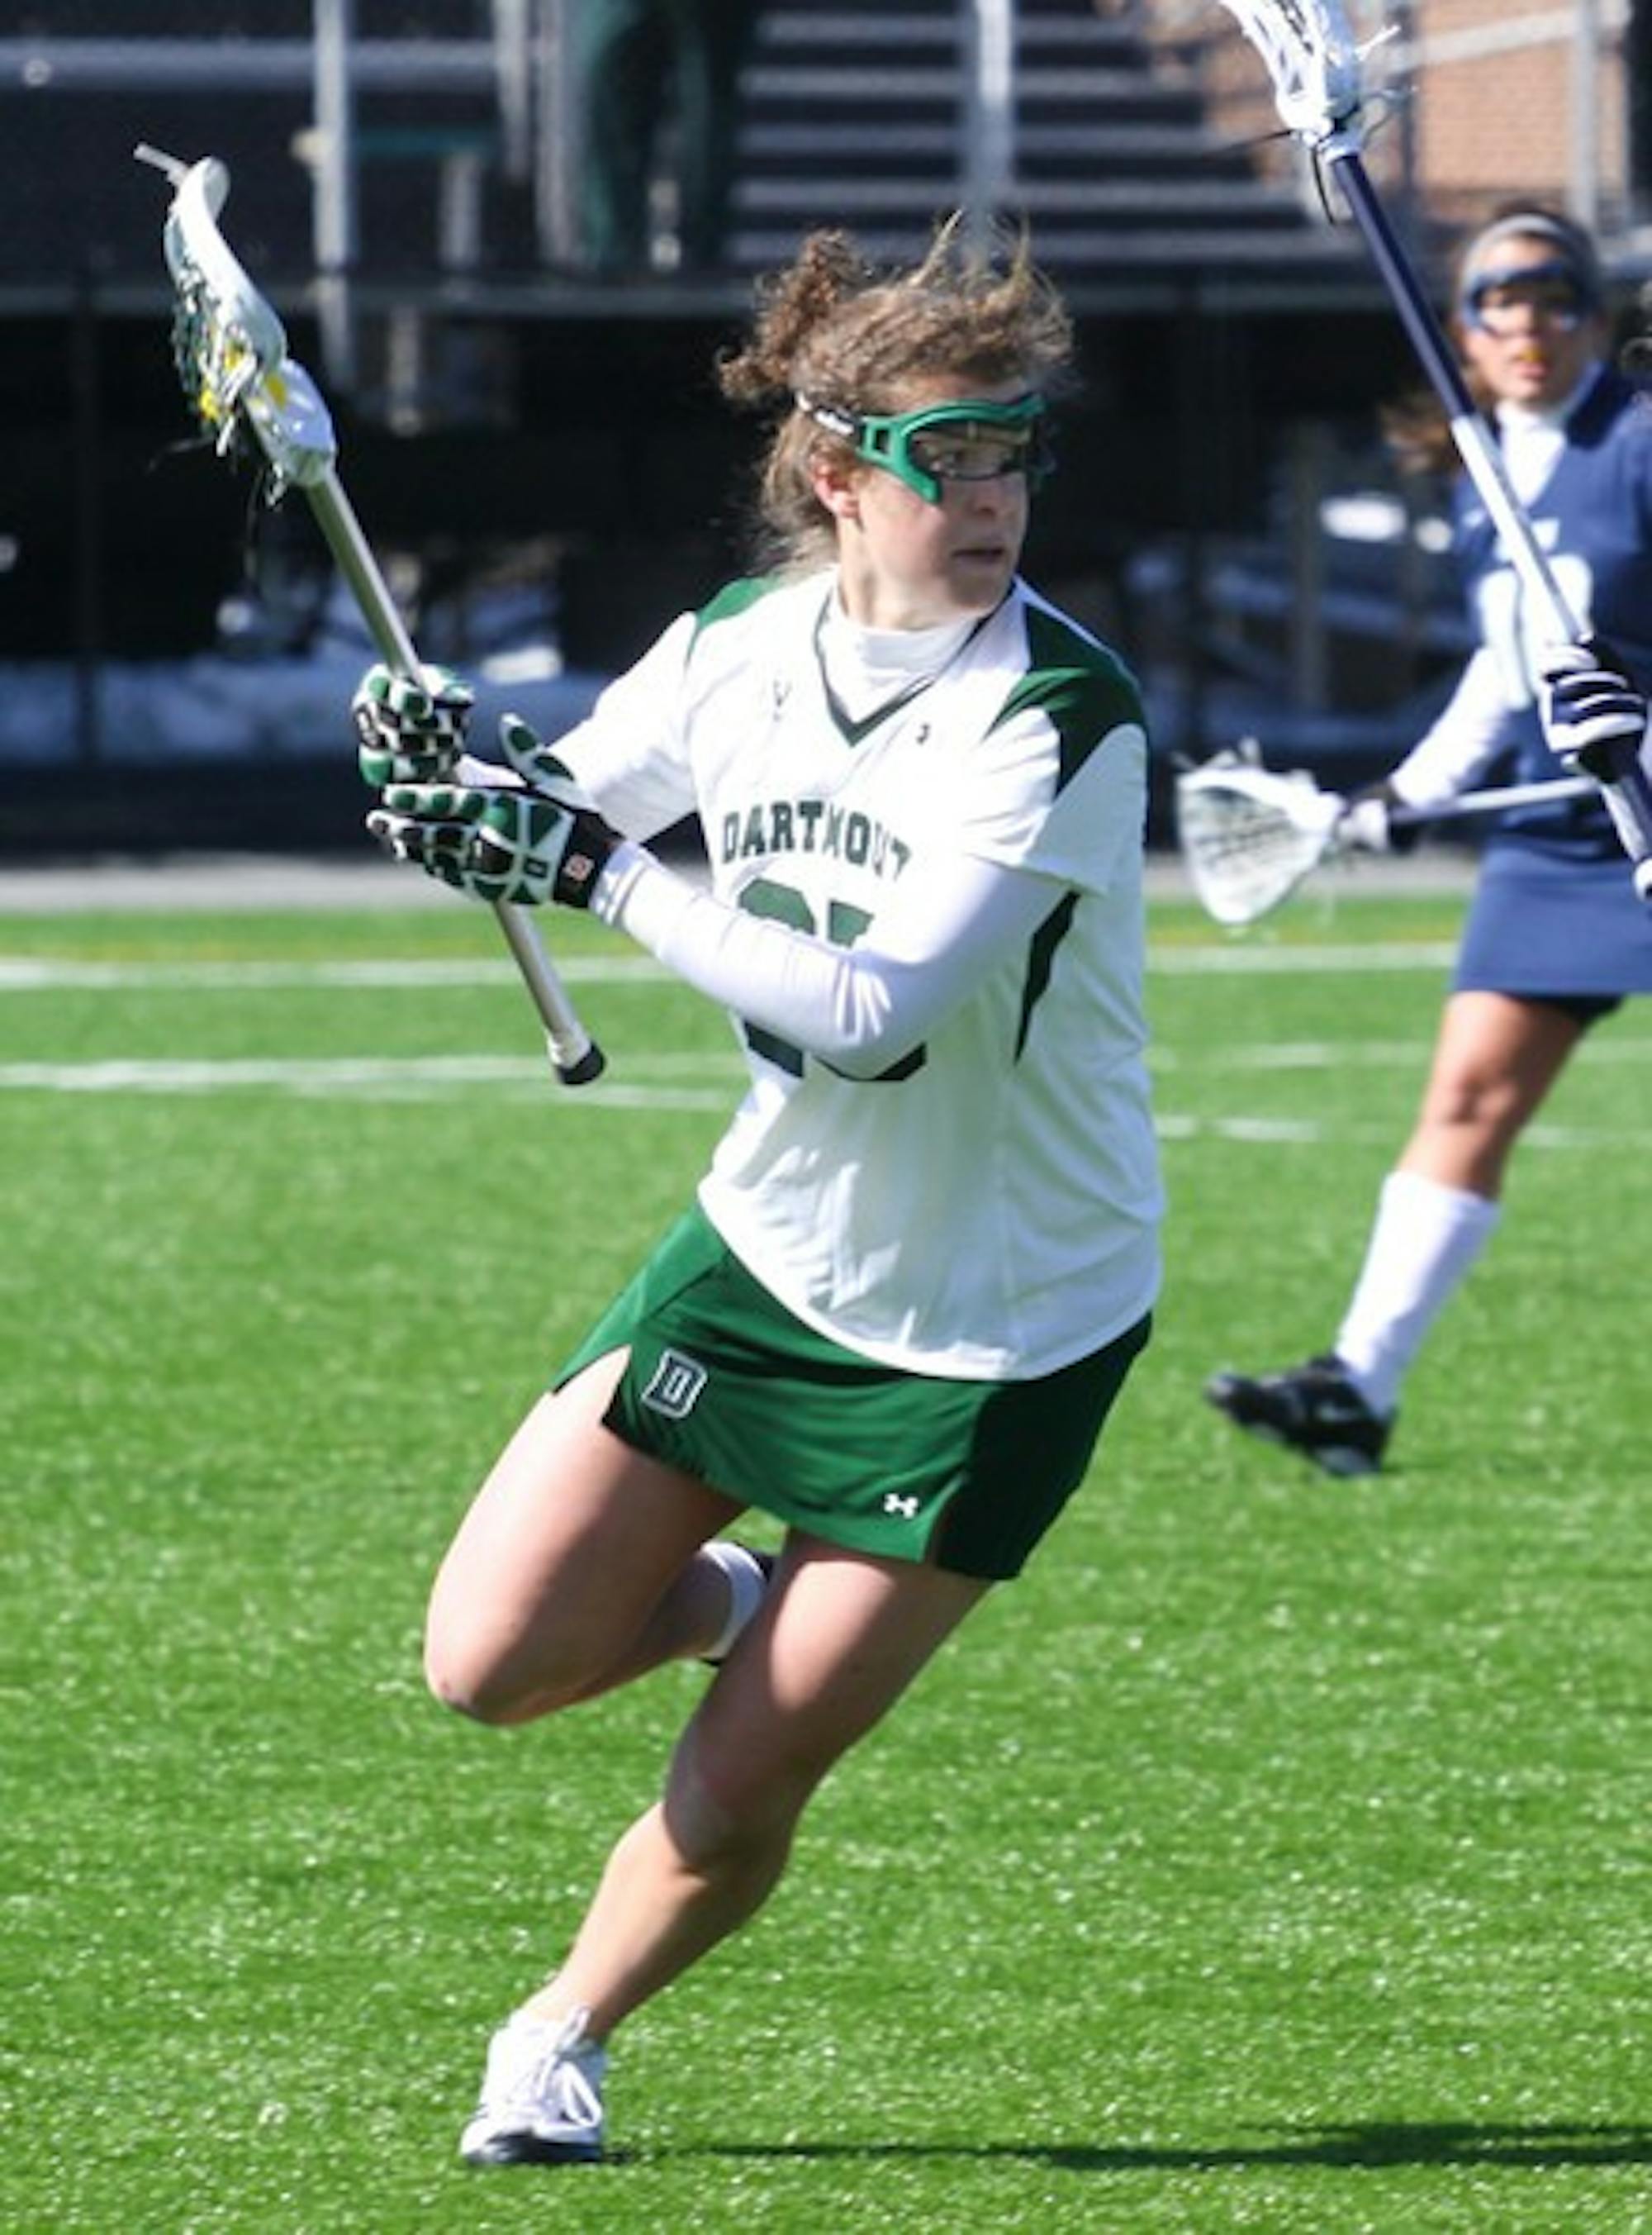 After beating UNH at home Saturday, 10-8, the Big Green women's lacrosse team fell to UMass Wednesday, 13-10.